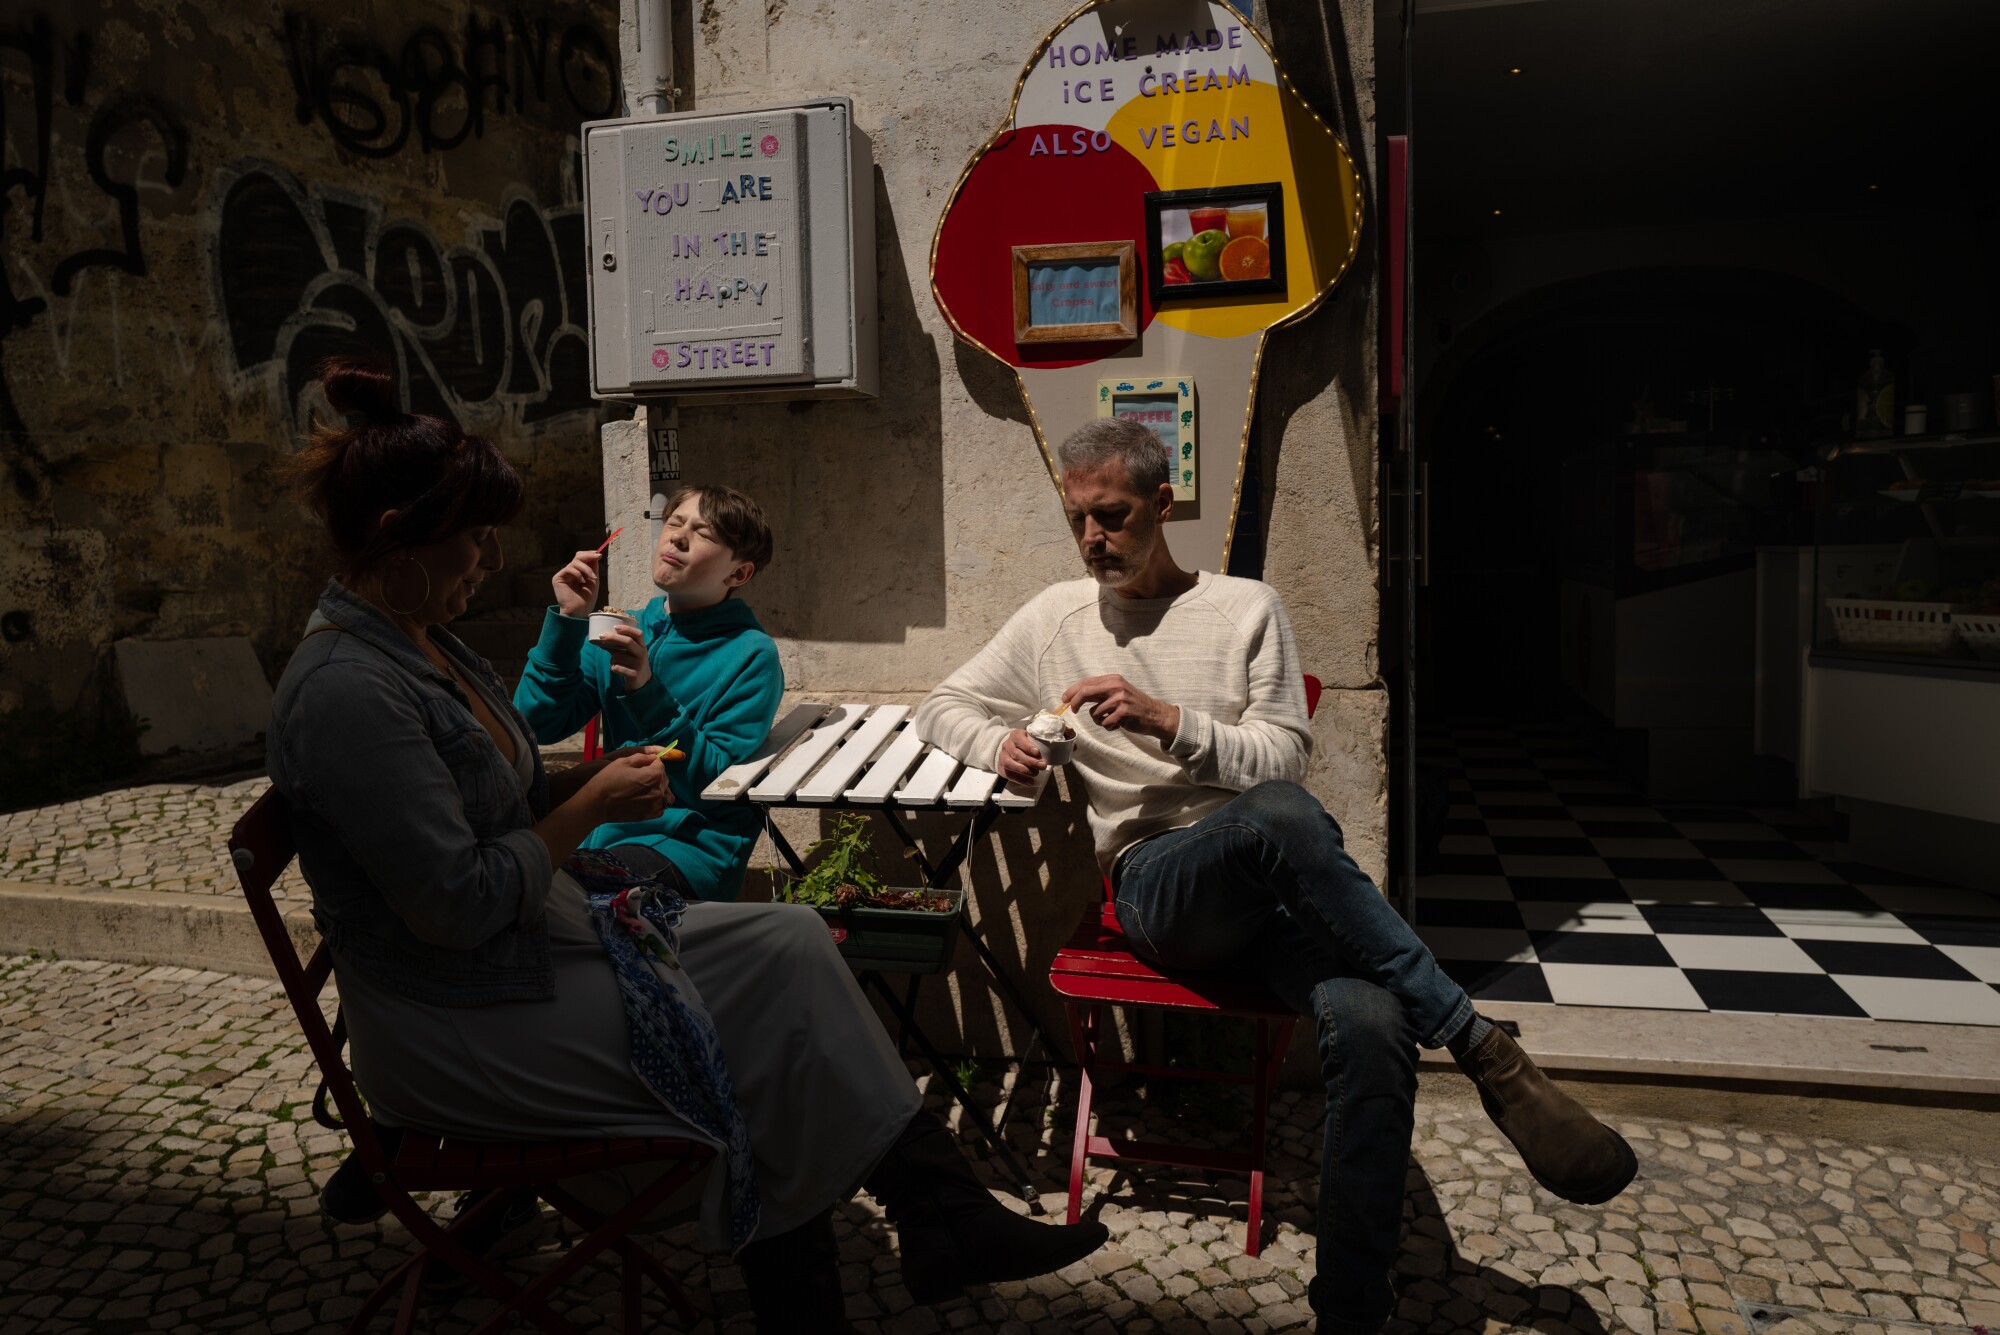 A woman, a man and a boy eat ice cream at a table outside a store